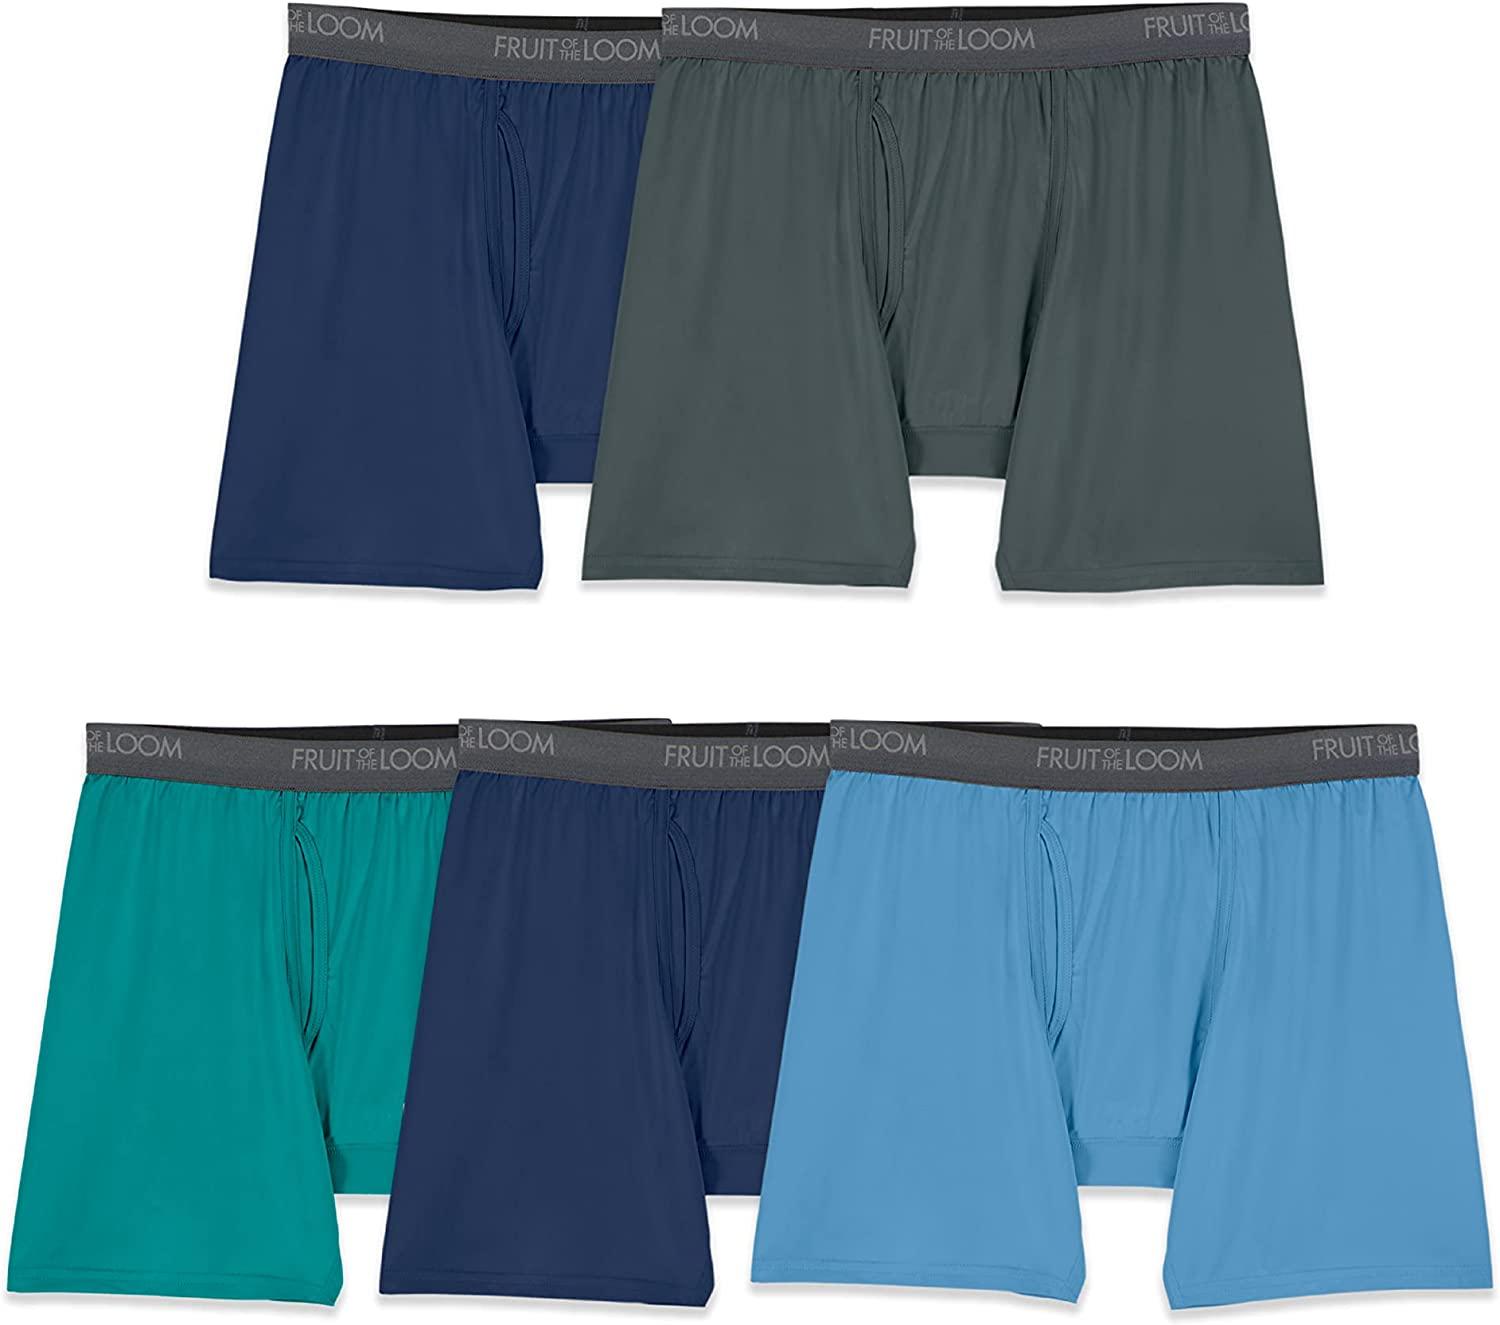 Fruit of the Loom Stretch Boxer Briefs 5 Pack for $11.79